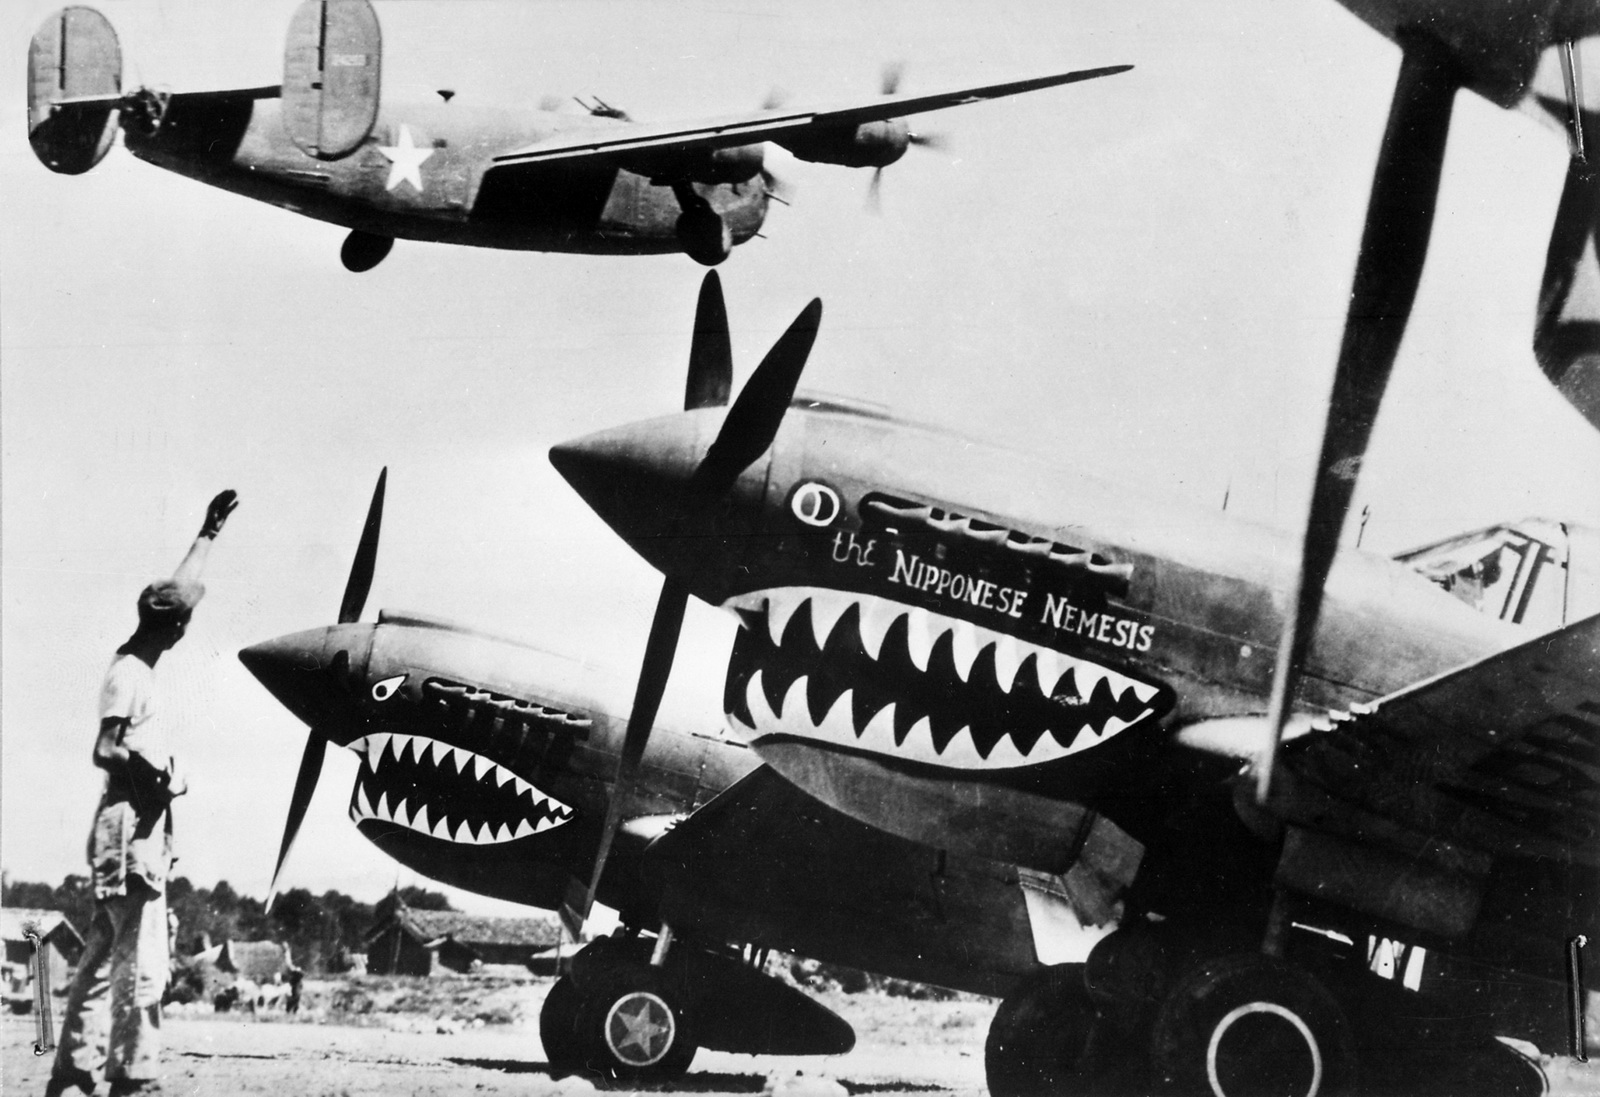 Copy+of+Landing+wheels+recede+as+this+U.S.+Army+Air+Forces+Liberator+bomber+crosses+the+shark-nosed+bows+of+U.S.+P-40+fighter+planes.jpg